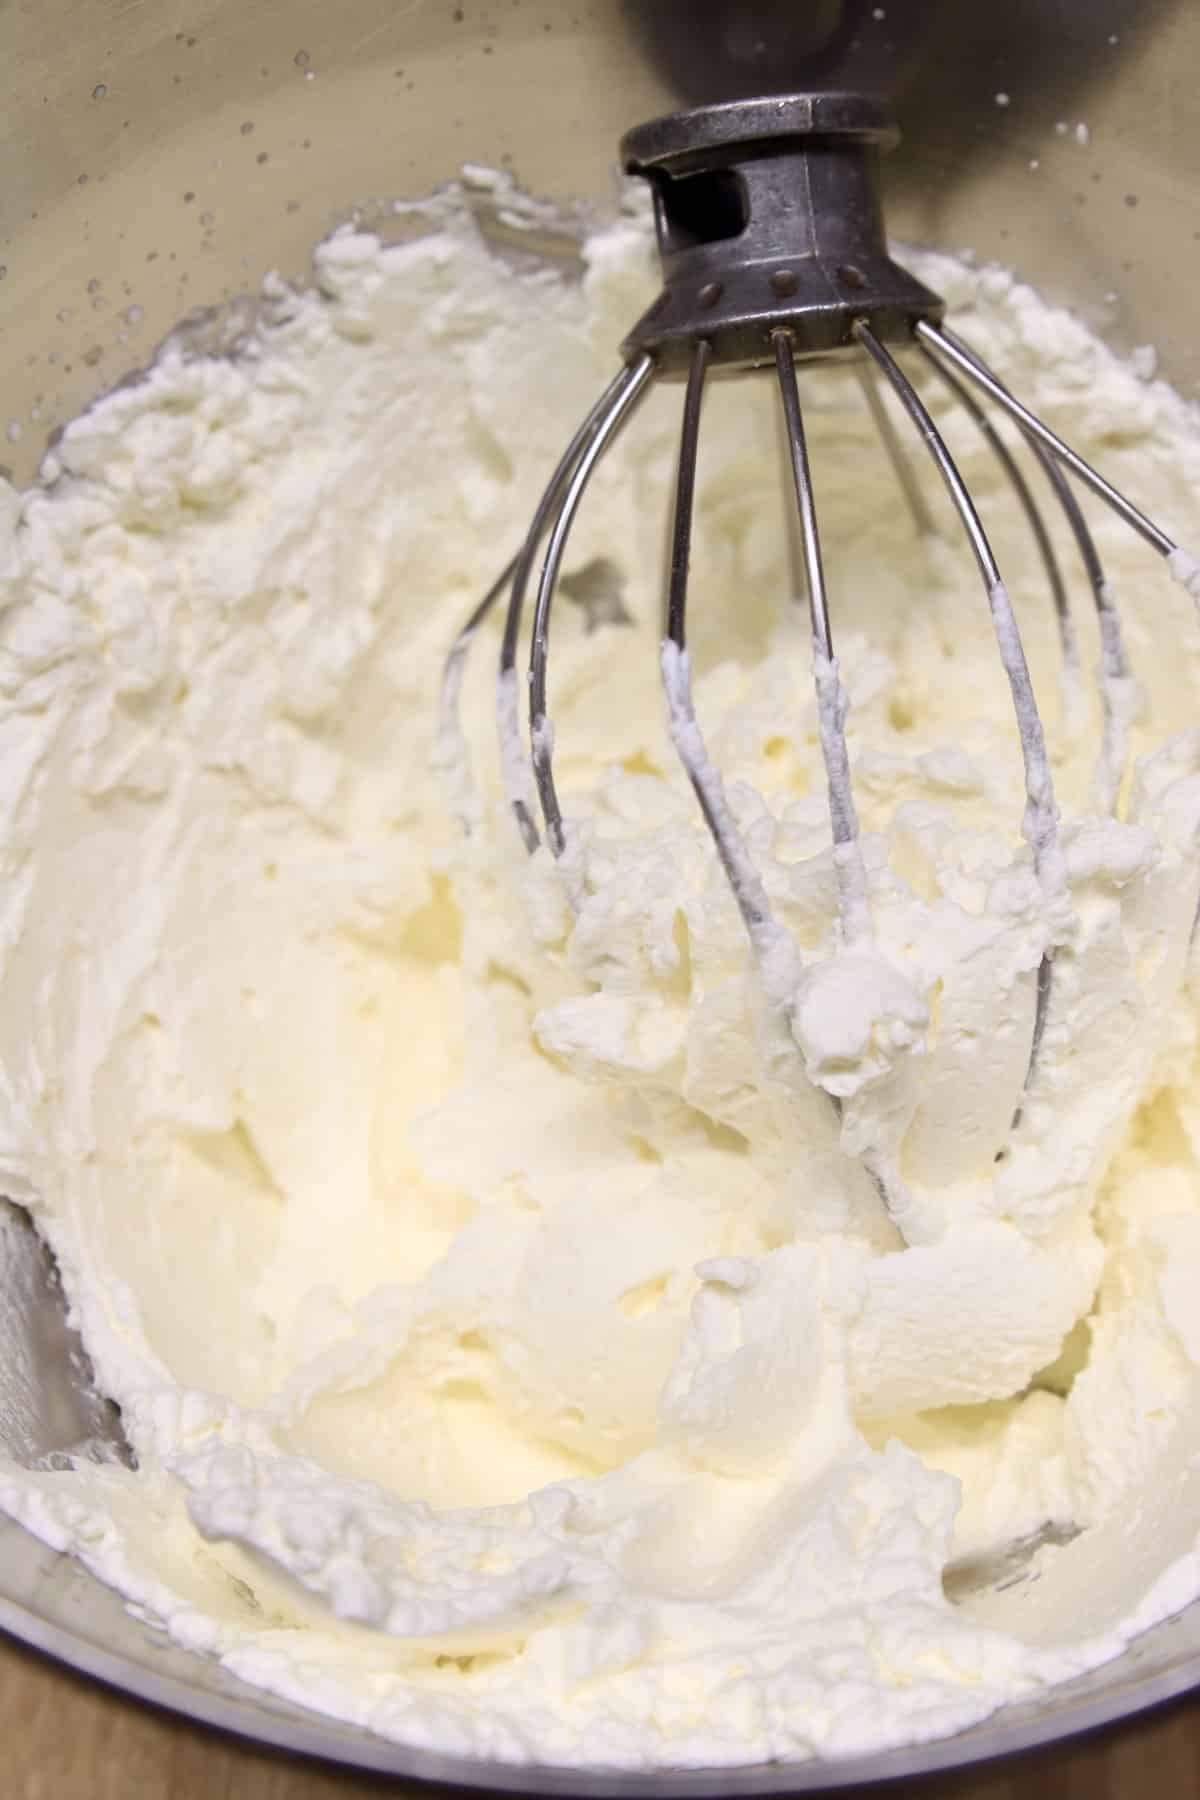 Whipped cream in a bowl with beater whisk.